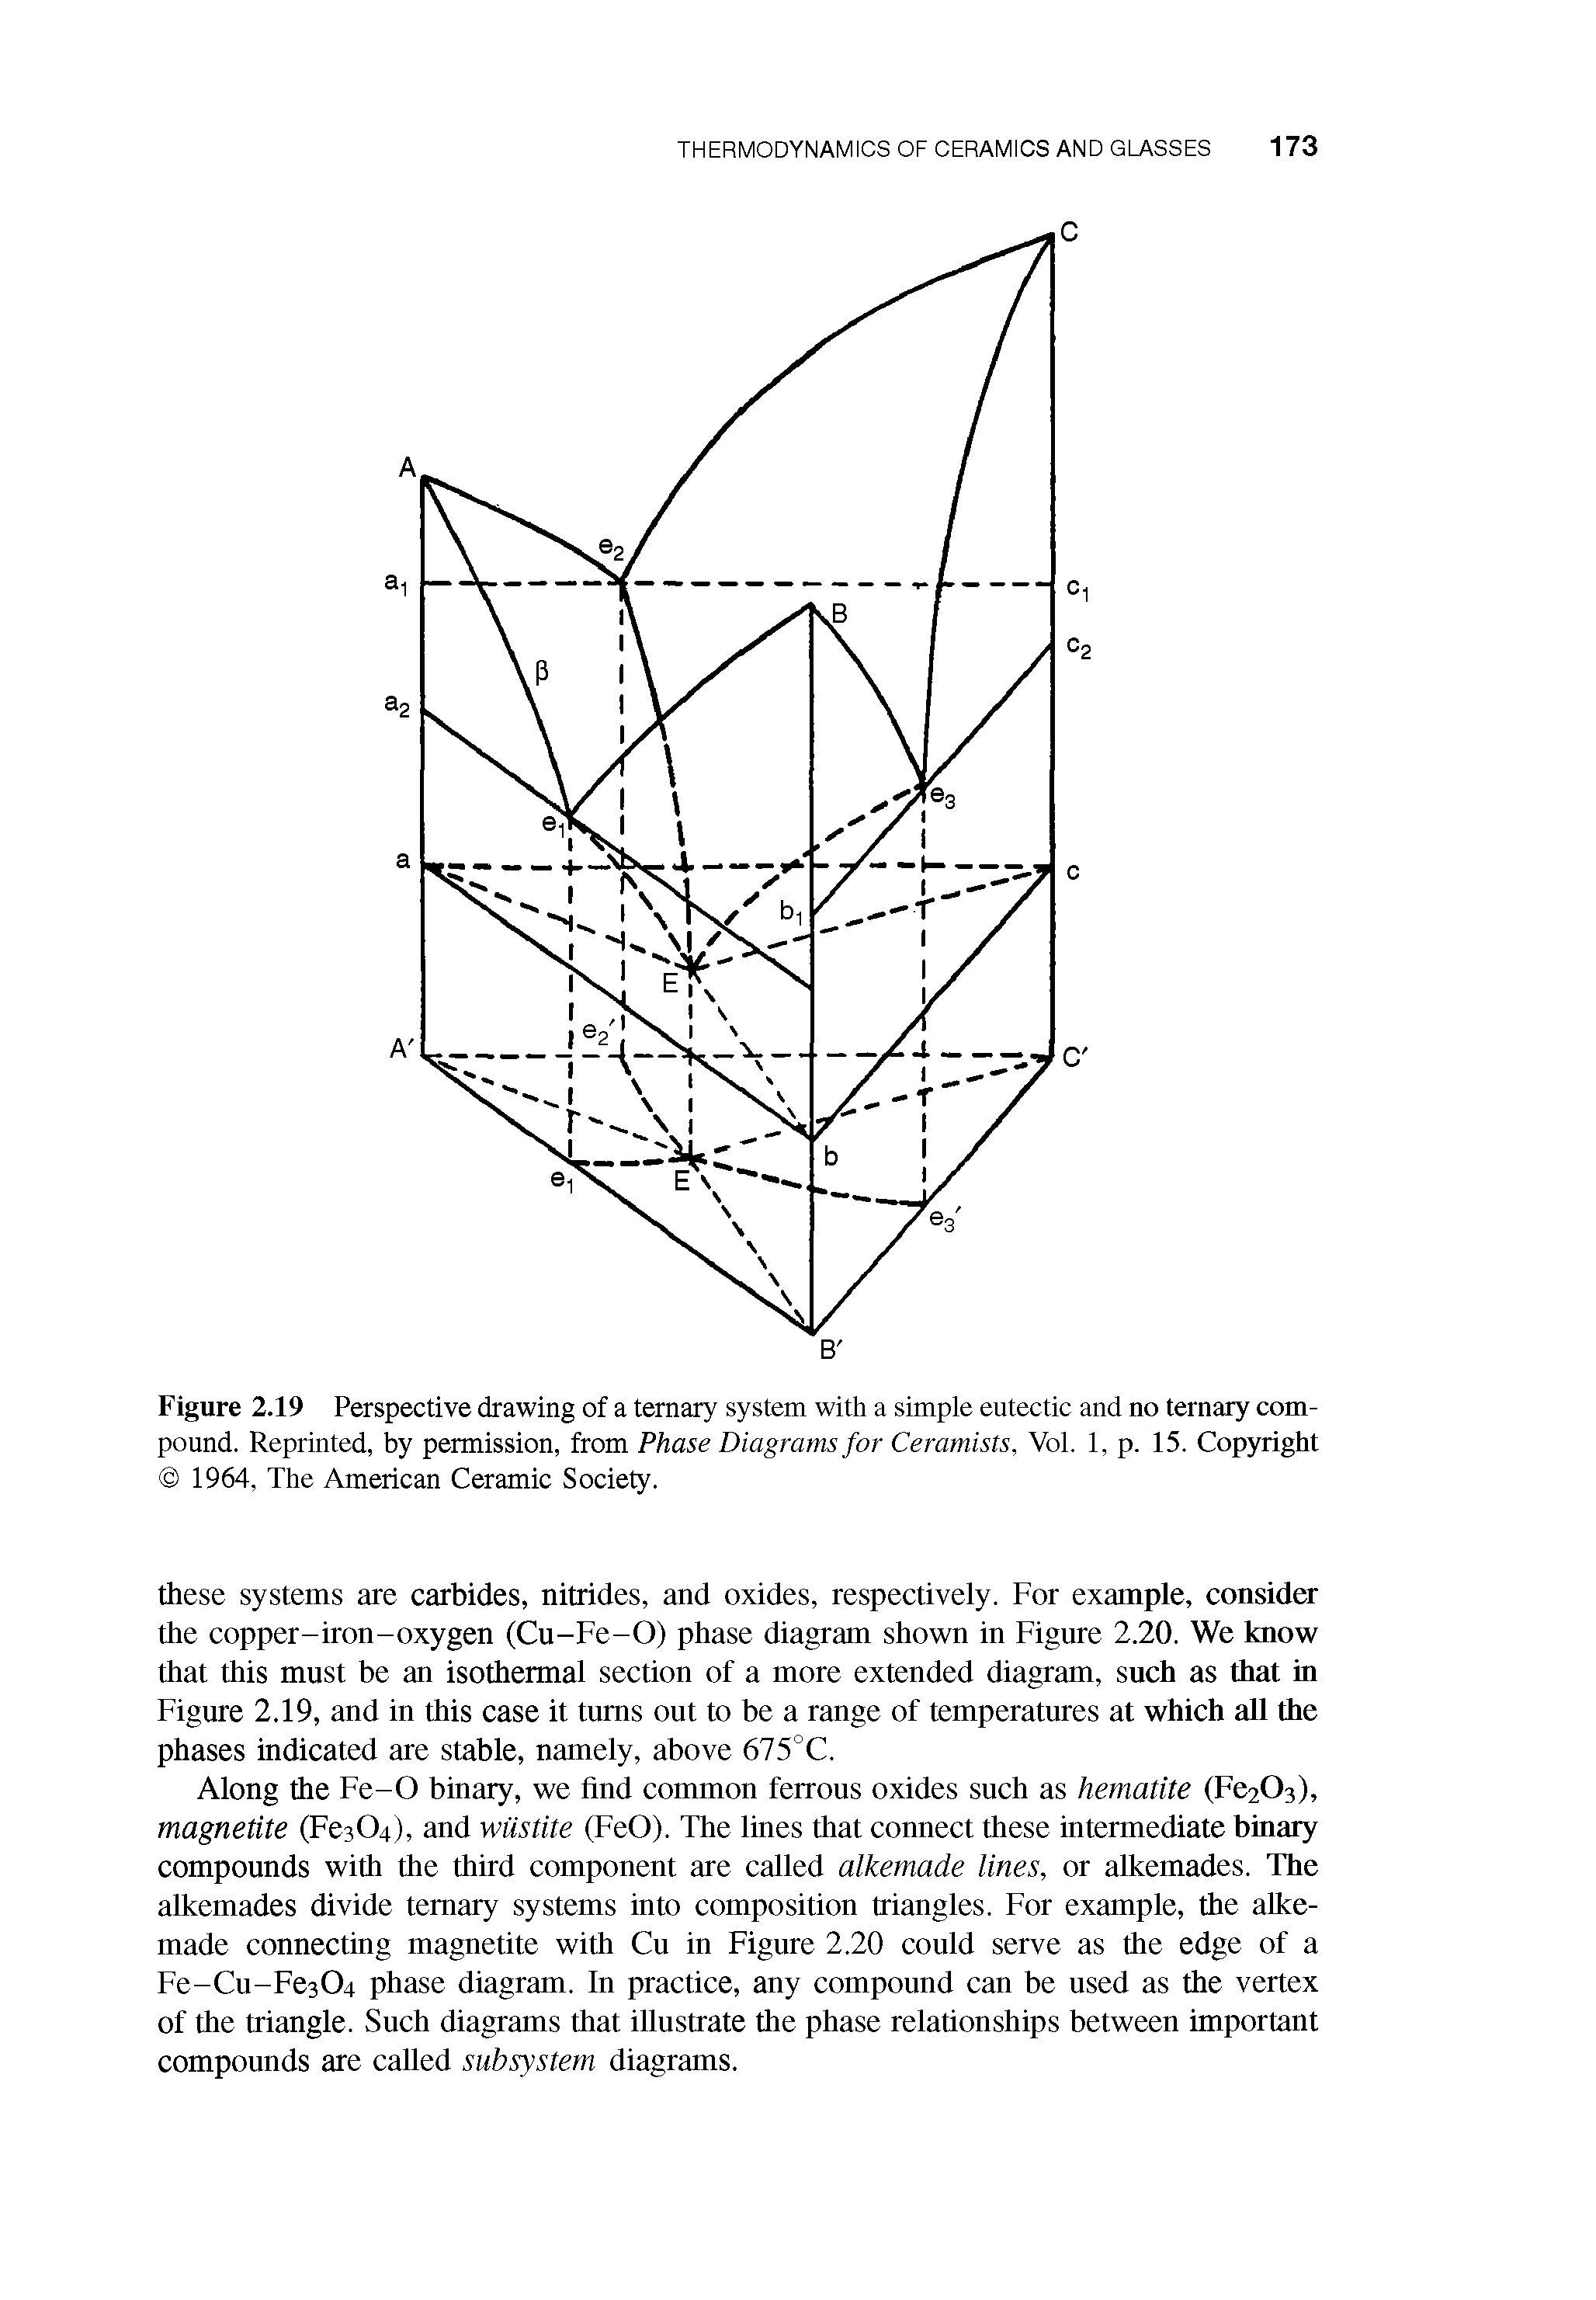 Figure 2.19 Perspective drawing of a ternary system with a simple eutectic and no ternary compound. Reprinted, by permission, from Phase Diagrams for Ceramists, Vol. 1, p. 15. Copyright 1964, The American Ceramic Society.